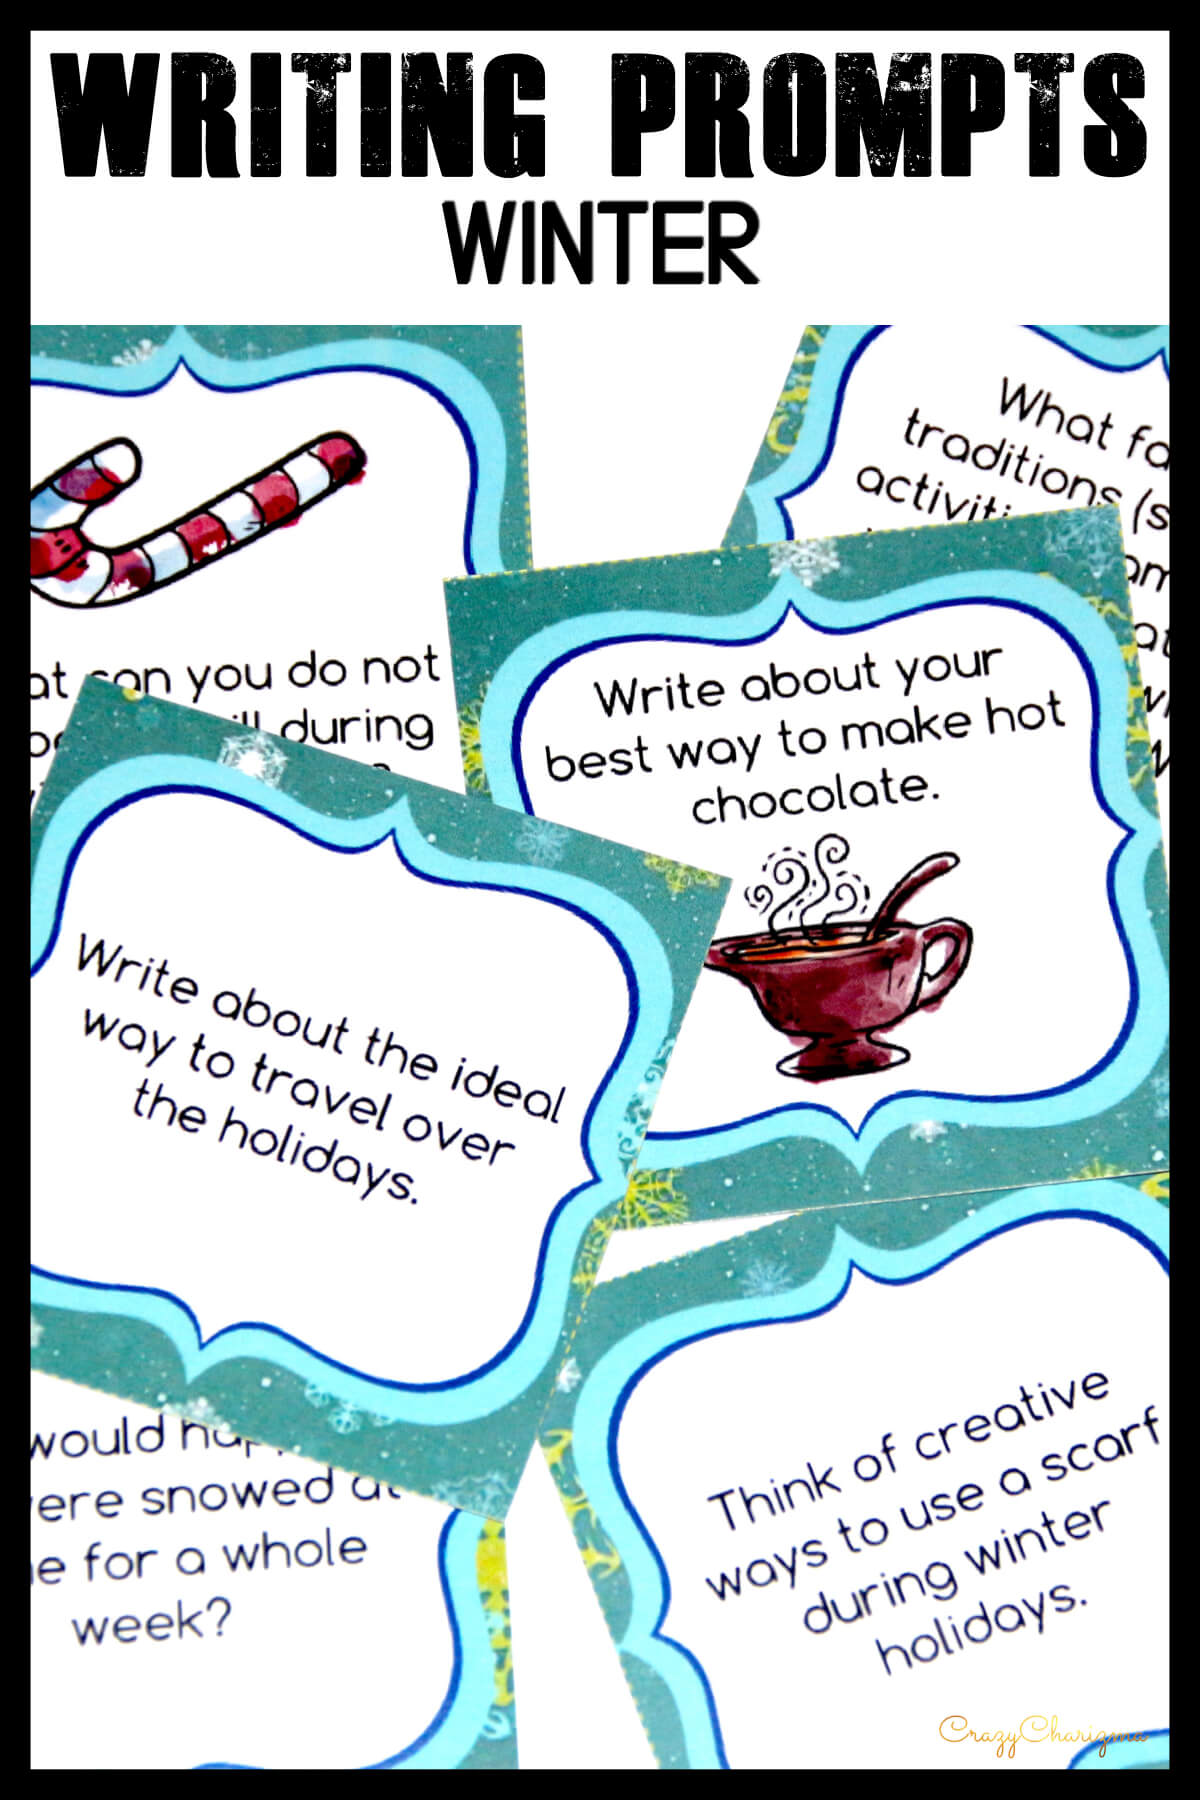 Celebrate WINTER in your classroom and provide students with writing tasks and ideas. The packet contains narrative, informational and opinion writing prompts for teens. The prompts can be used as Writing Centers, as well as with adults during ESL lessons.